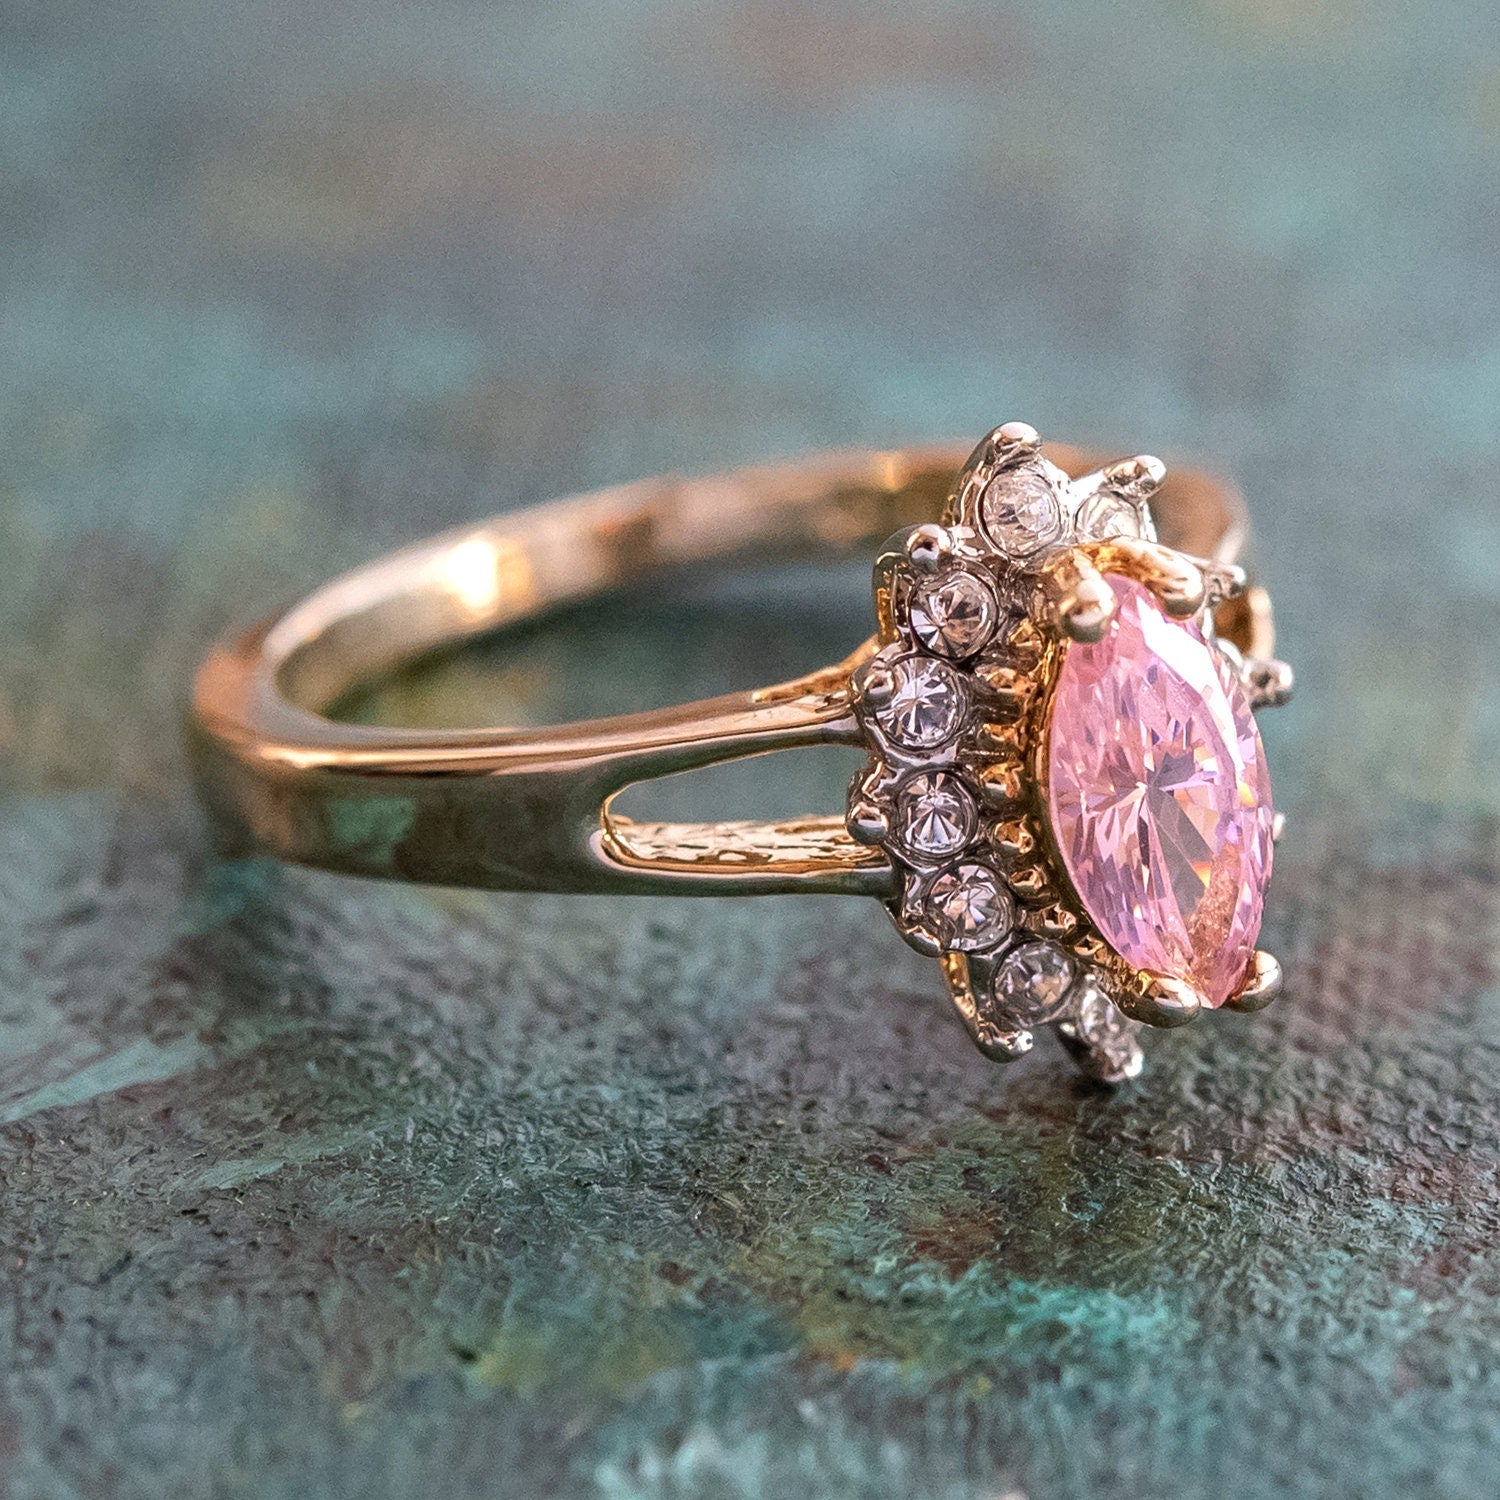 Vintage Ring Pink Tourmaline and Clear Swarovski Crystals 18kt Gold Antique Jewlery for Women #R1314 - Limited Stock - Never Worn